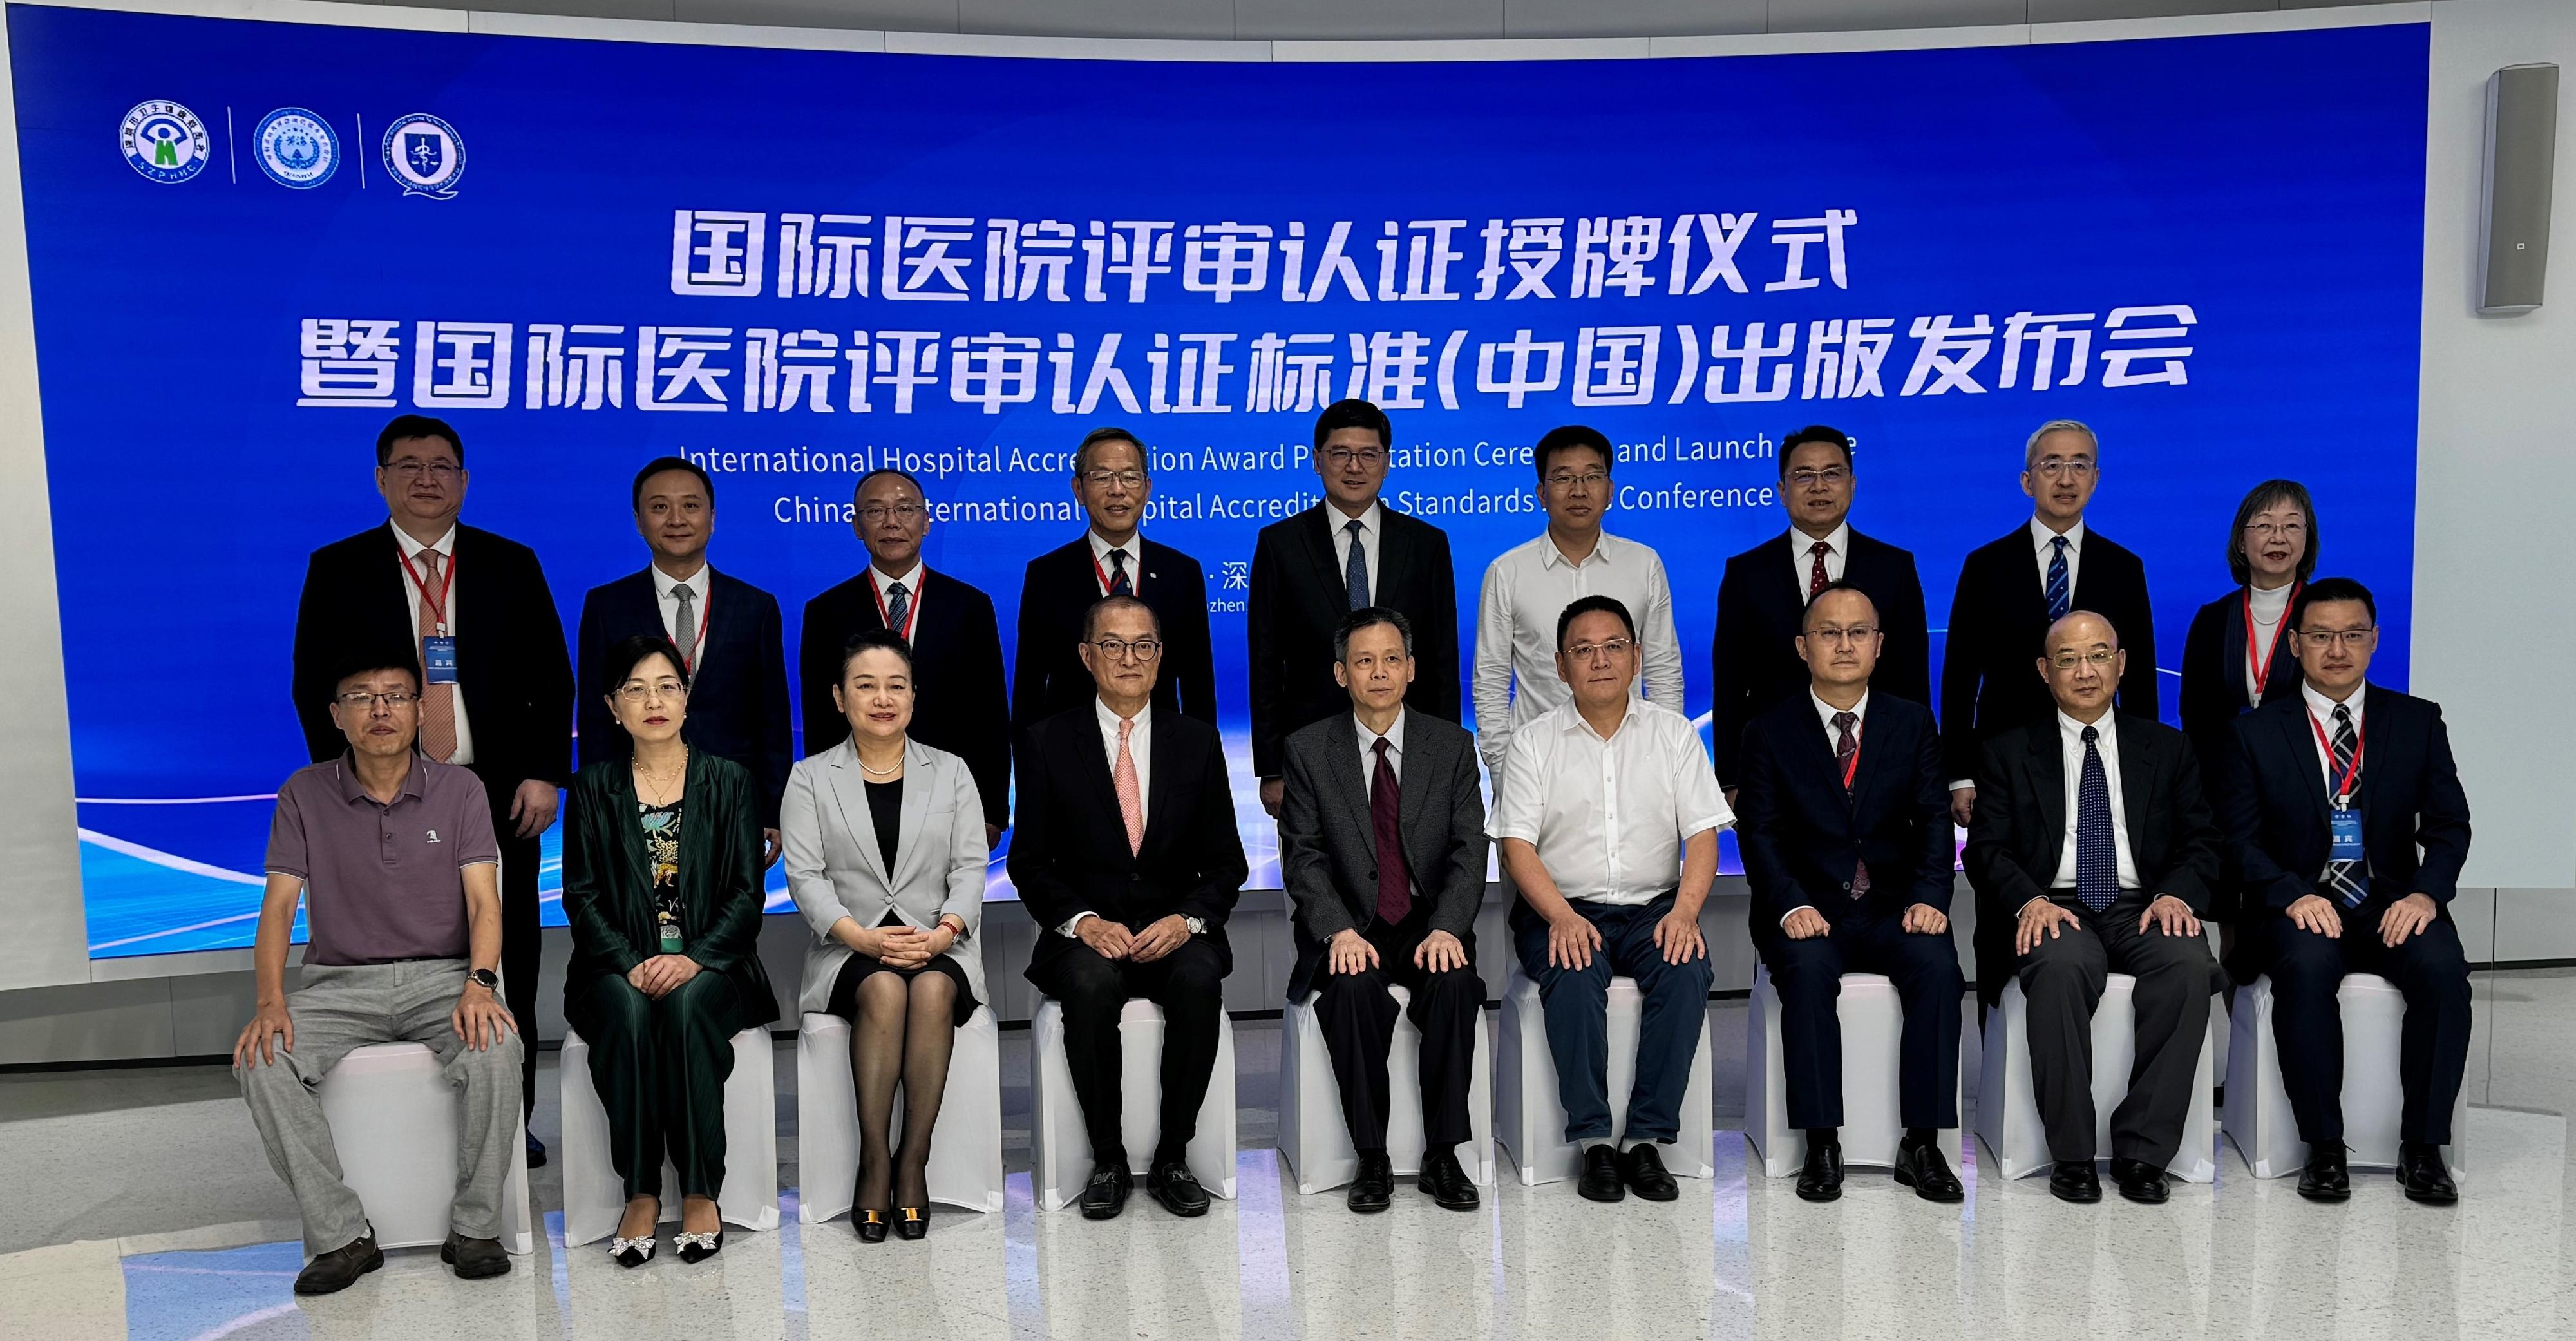 The Secretary for Health, Professor Lo Chung-mau, attended the International Hospital Accreditation Award Presentation Ceremony and Launch of the China’s International Hospital Accreditation Standards Press Conference held in Qianhai, Shenzhen, today (June 5) to witness the accreditation of the first batch of Mainland hospitals under the China’s International Hospital Accreditation Standards (2021 Version). Photo shows Professor Lo (front row, fourth left); Second-level Inspector of the Health Commission of Guangdong Province Mr Wu Xiaojia (front row, fifth left); the Director General of the Public Hygiene and Health Commission of Shenzhen Municipality, Ms Wu Hongyan (front row, third left); the Chief Executive of the Hospital Authority, Dr Tony Ko (back row, fifth left); and the Dean of the Li Ka Shing Faculty of Medicine of the University of Hong Kong, Professor Lau Chak-sing (back row, fourth left), with other attendees.